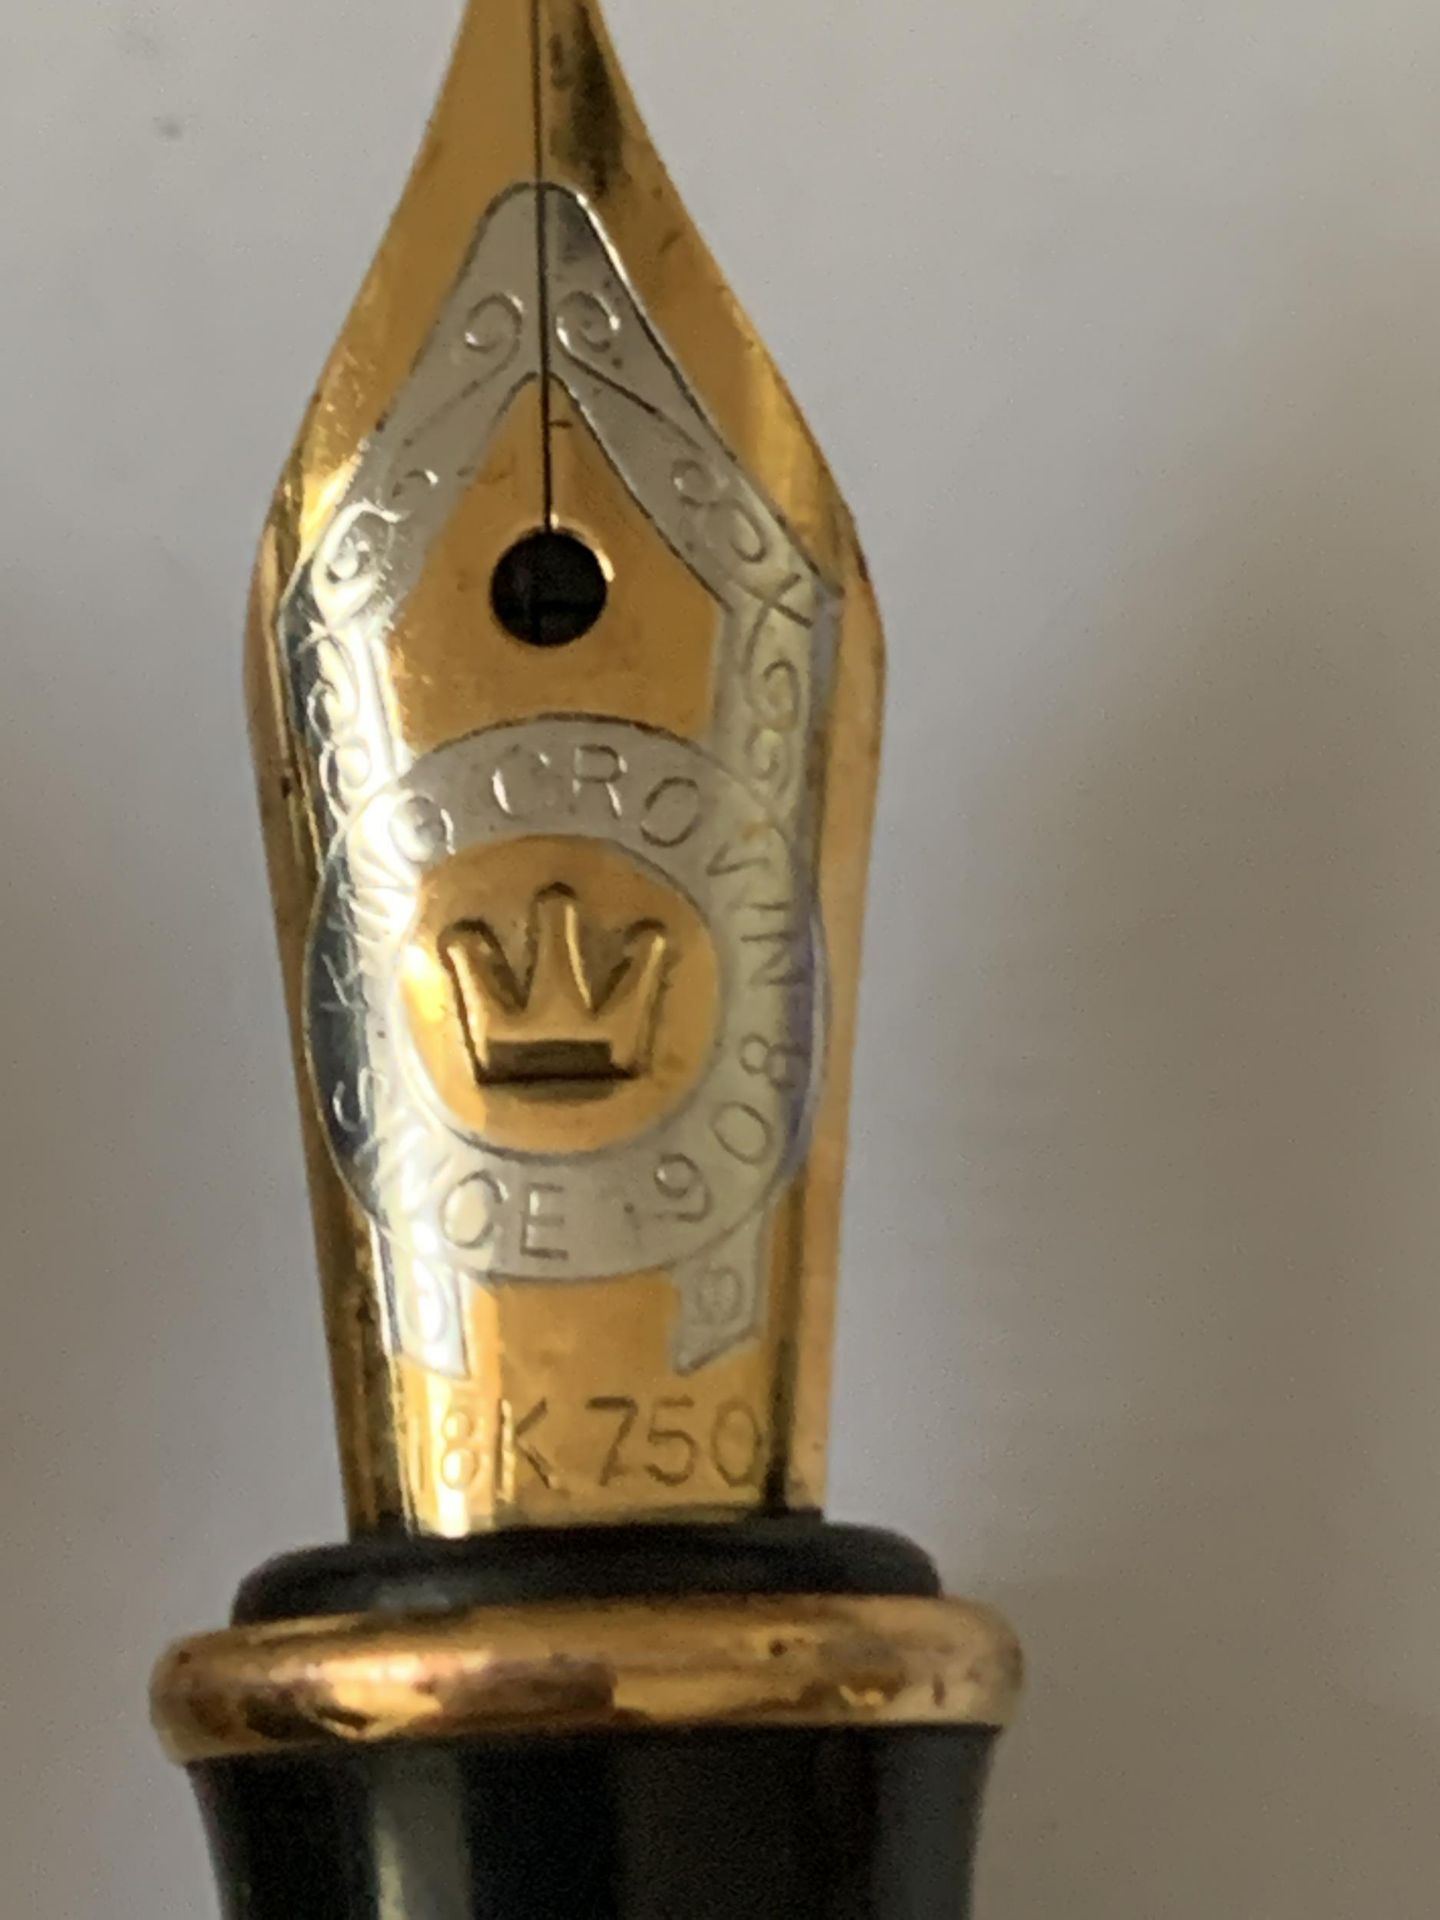 A KING CROWN 0125 FOUNTAIN PEN INLAID WITH SHELL WITH AN 18 CARAT GOLD NIB - Image 5 of 5